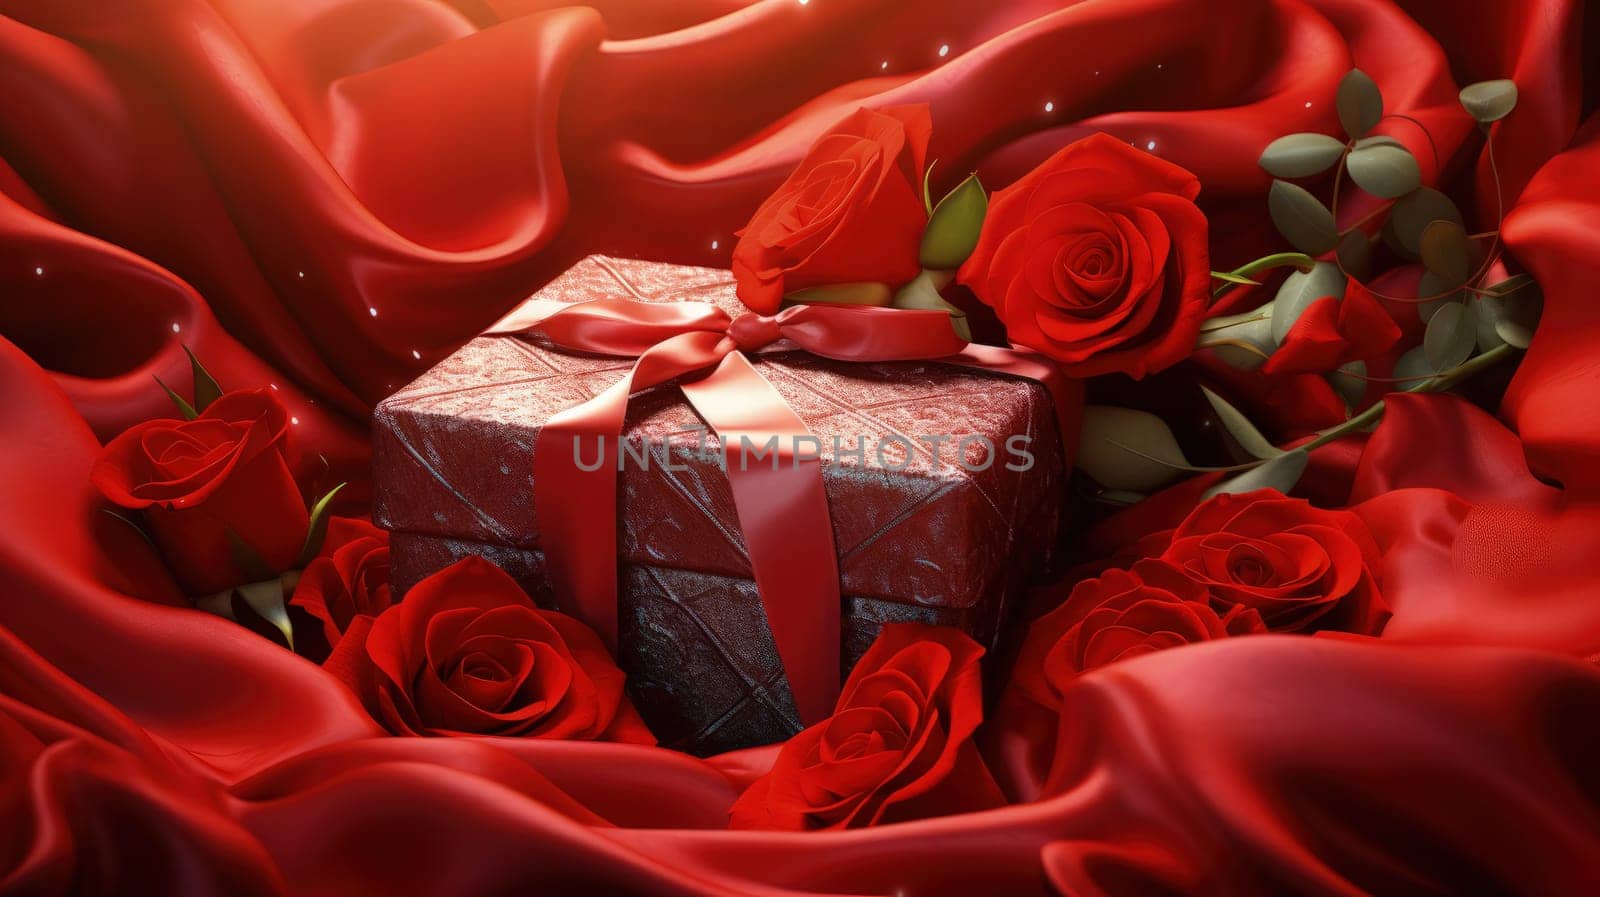 A luxurious gift box wrapped in a vibrant red silk, nestled in a bed of velvety red roses, soft petals scattering around, creating an enchanting Valentine's Day ambiance by Kadula